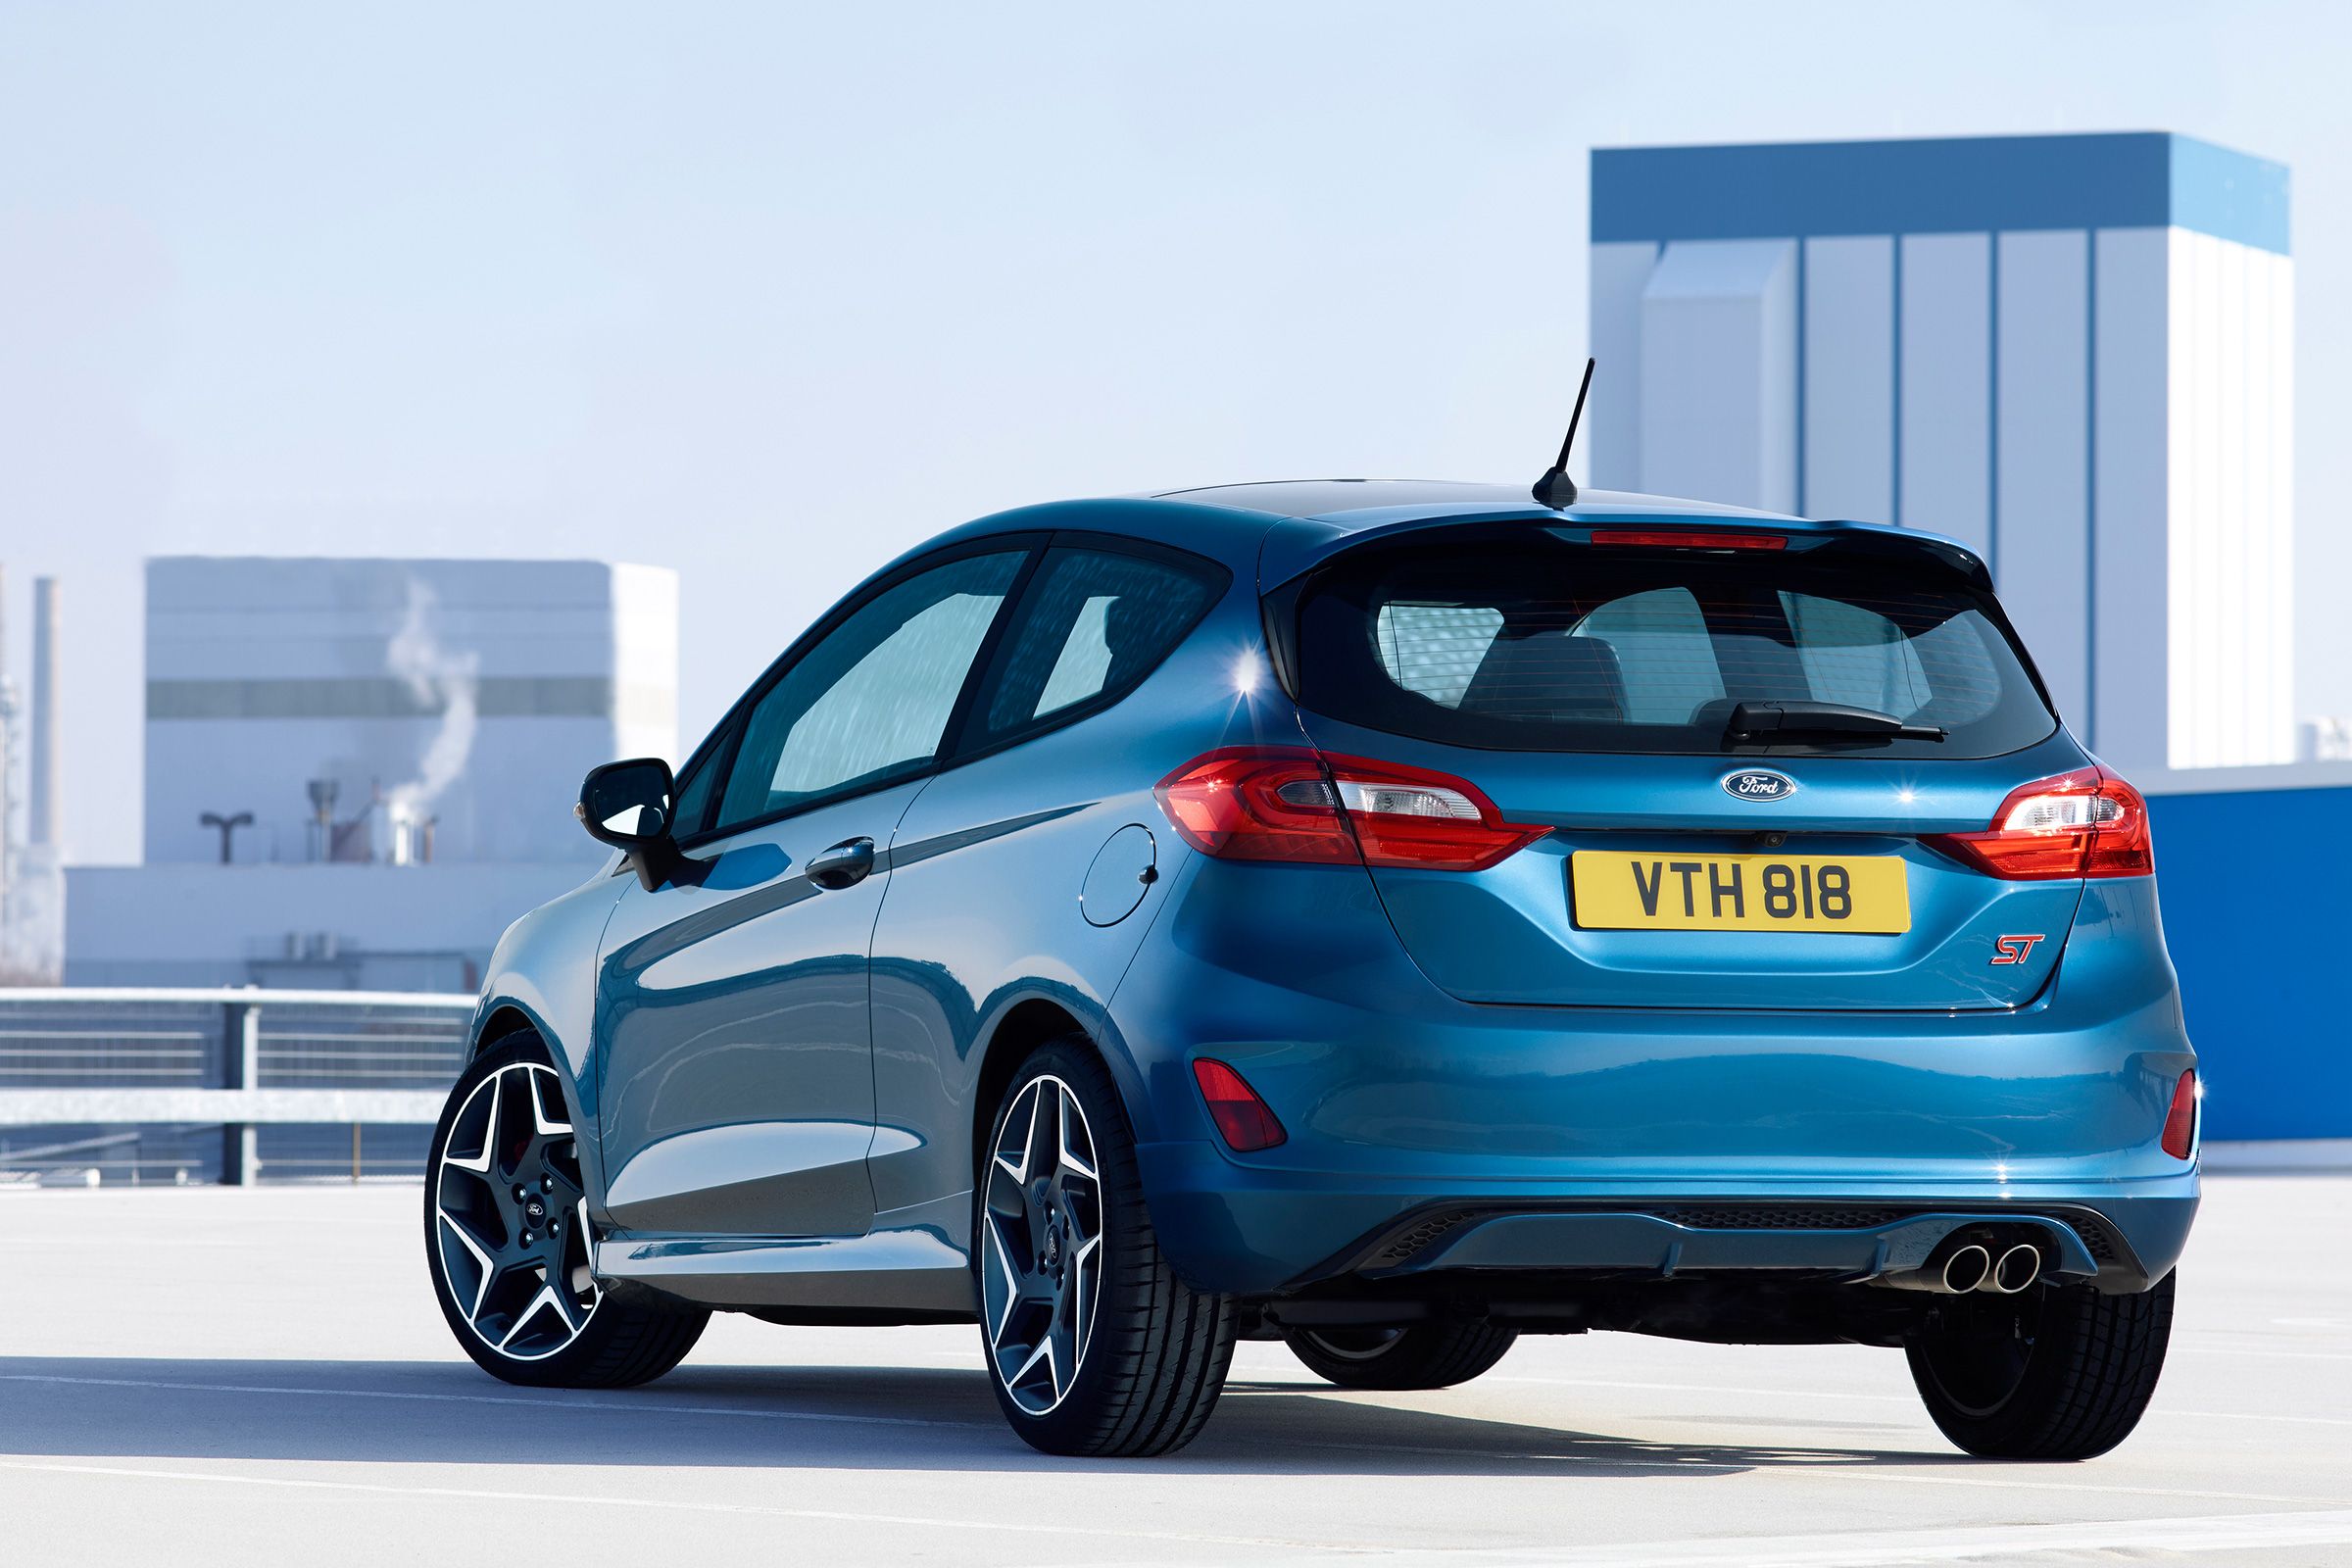 2018 Ford Fiesta ST Exterior Rear And Side (View 11 of 14)